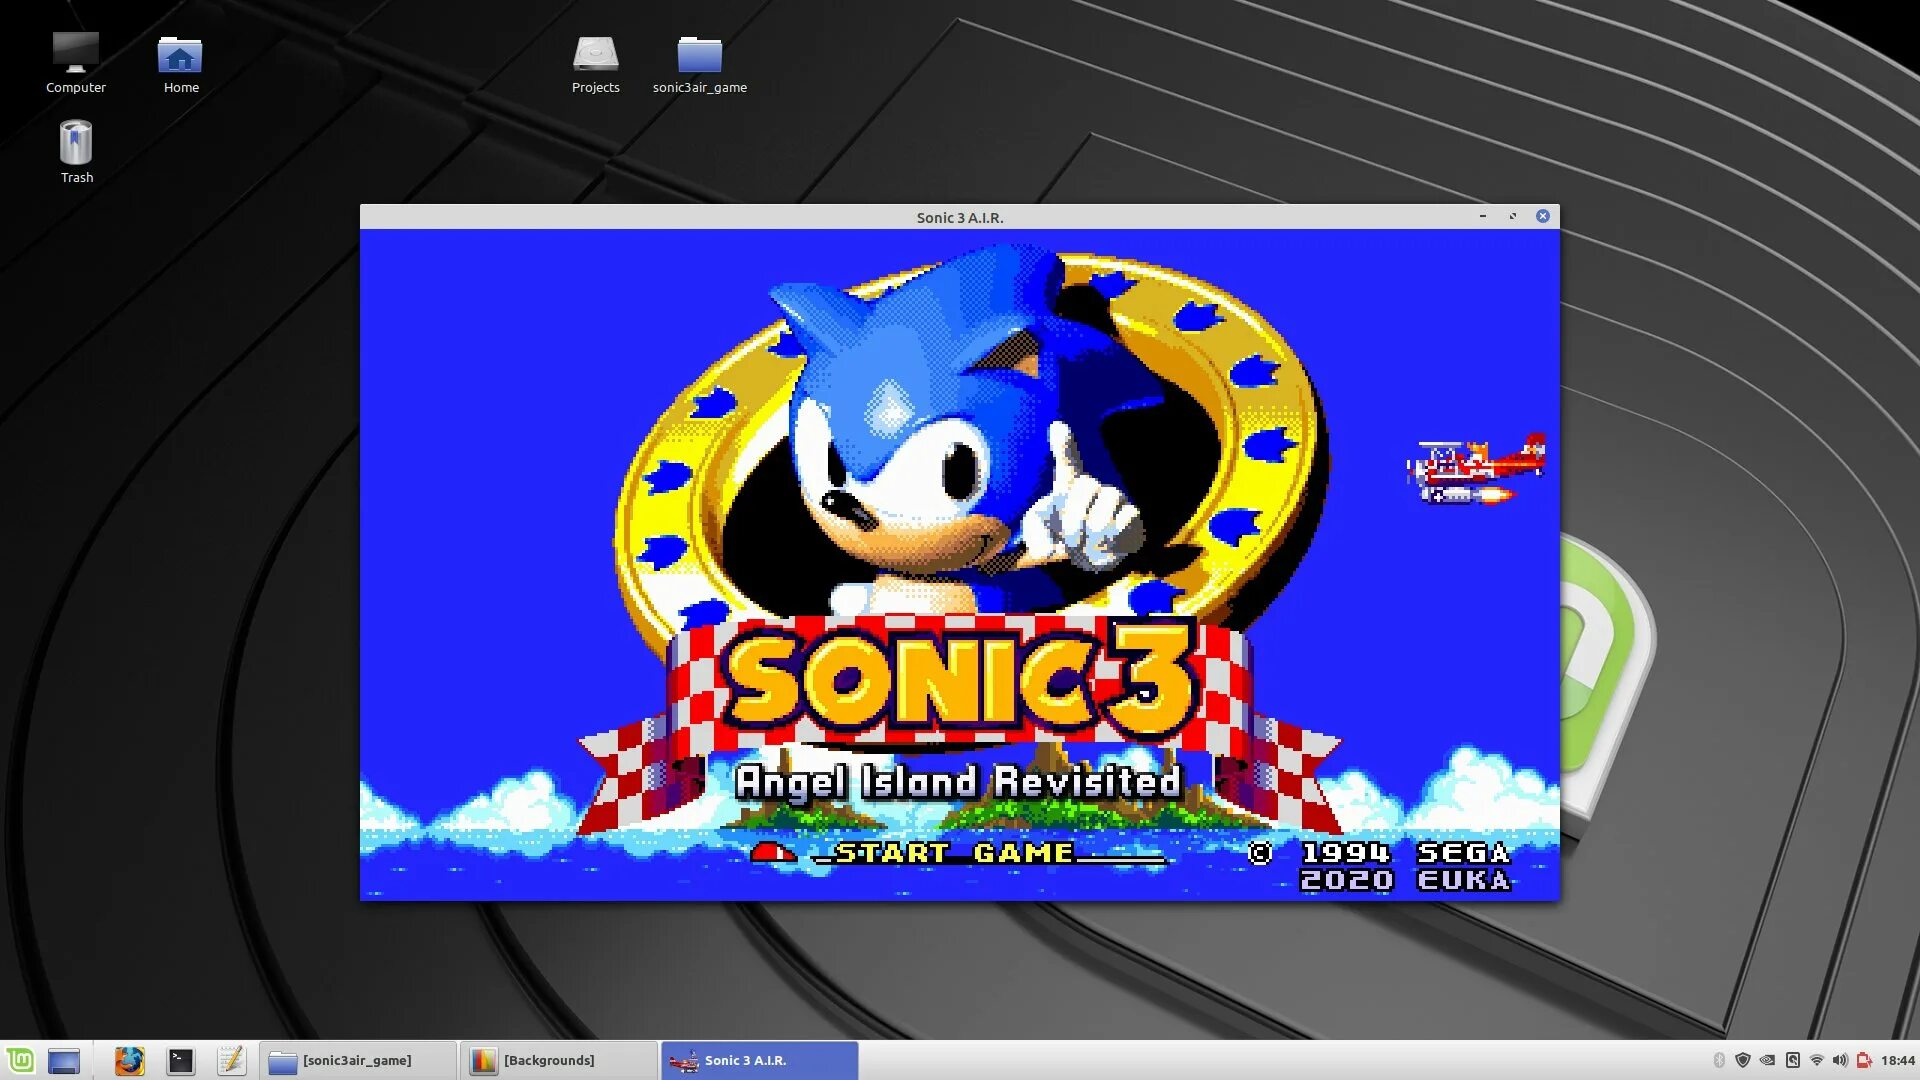 Sonic 3 АИР. Sonic 3 Air ROM. Соник 3 a.i.r. Sonic 3 complete. Sonic 3 mode